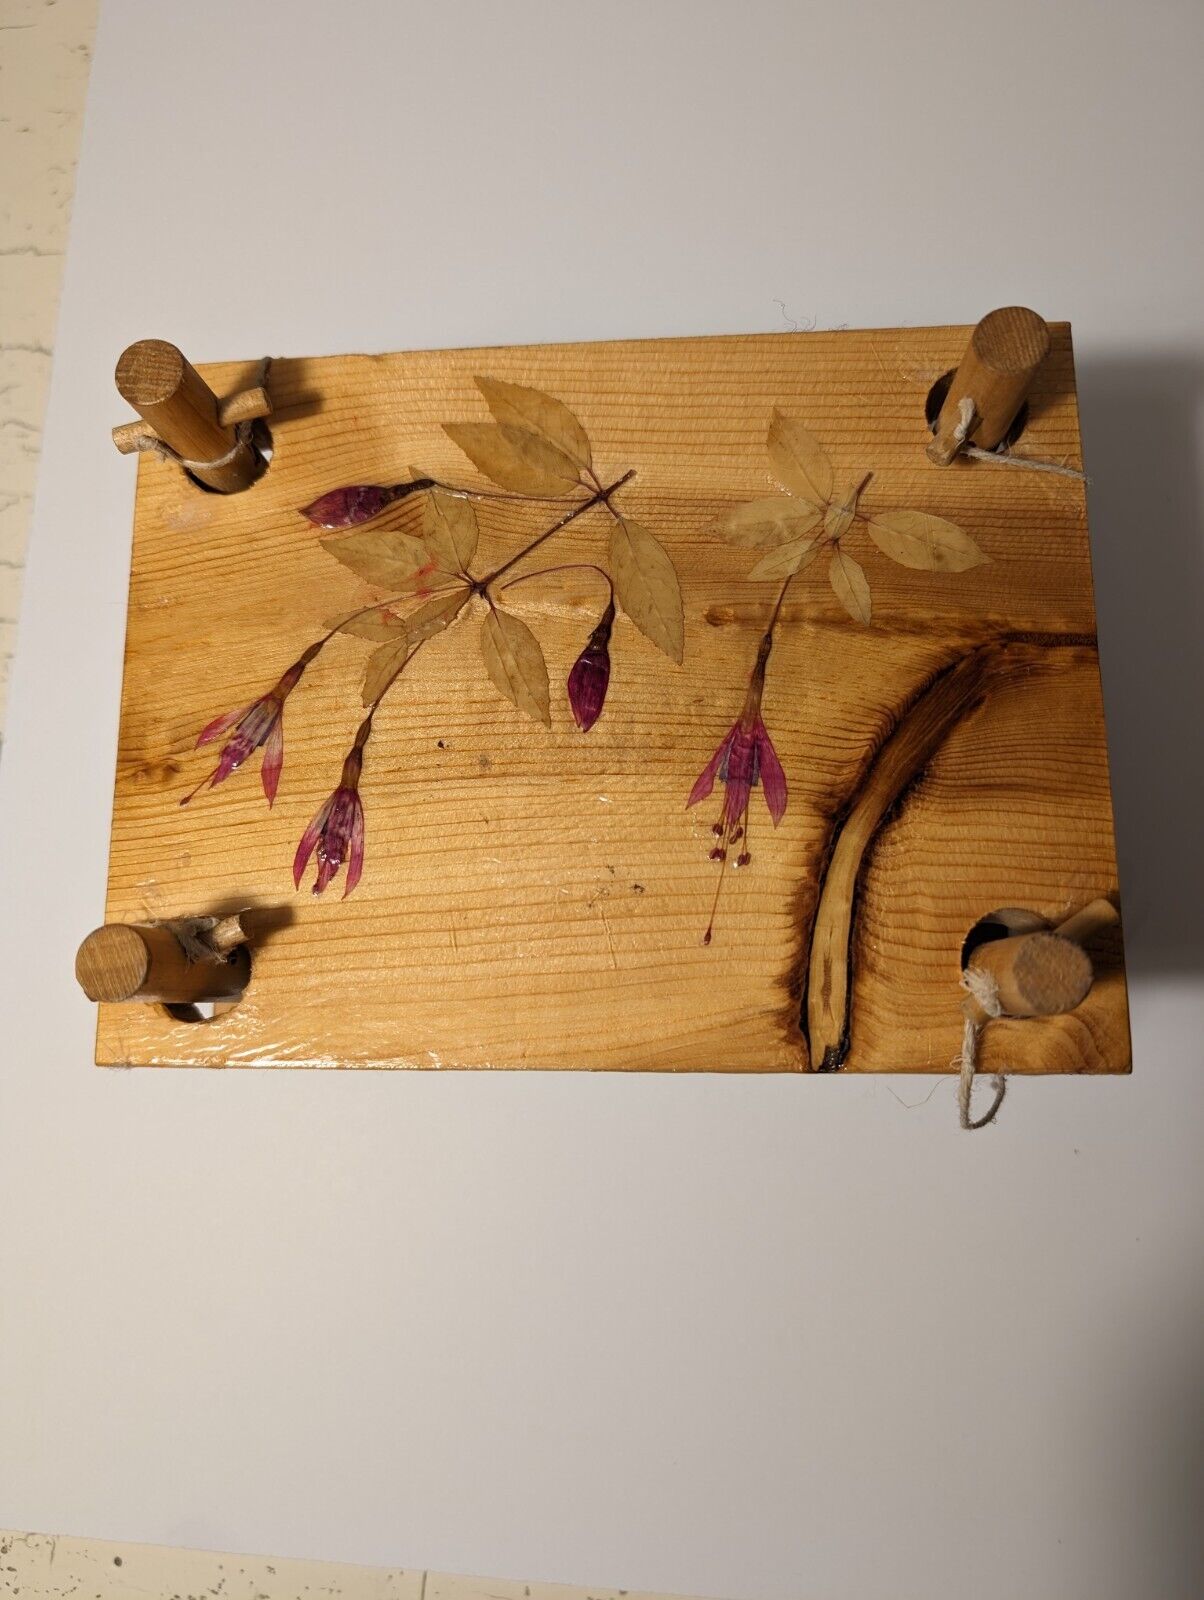 OOAK, rustic & charming small wooden flower press.